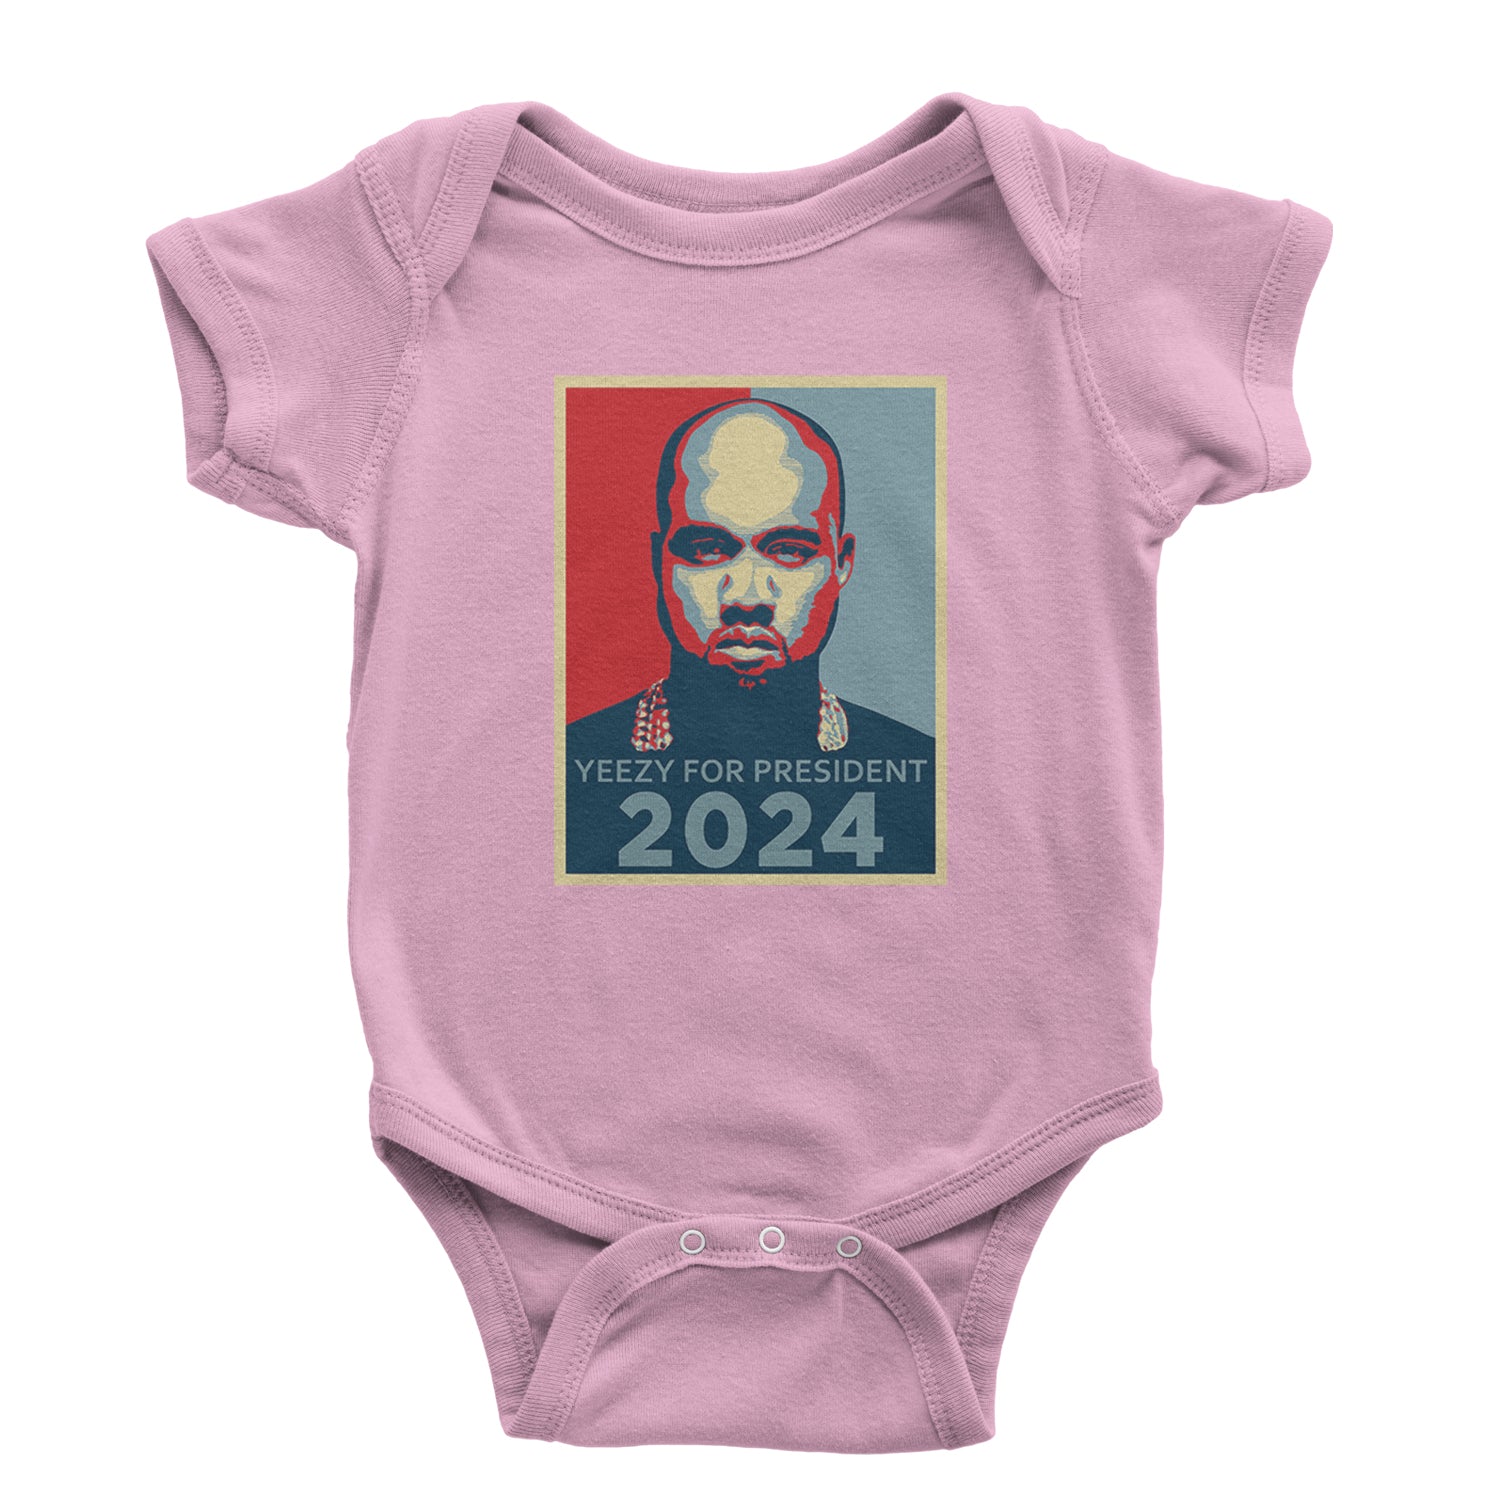 Yeezus For President Vote for Ye Infant One-Piece Romper Bodysuit and Toddler T-shirt Light Pink